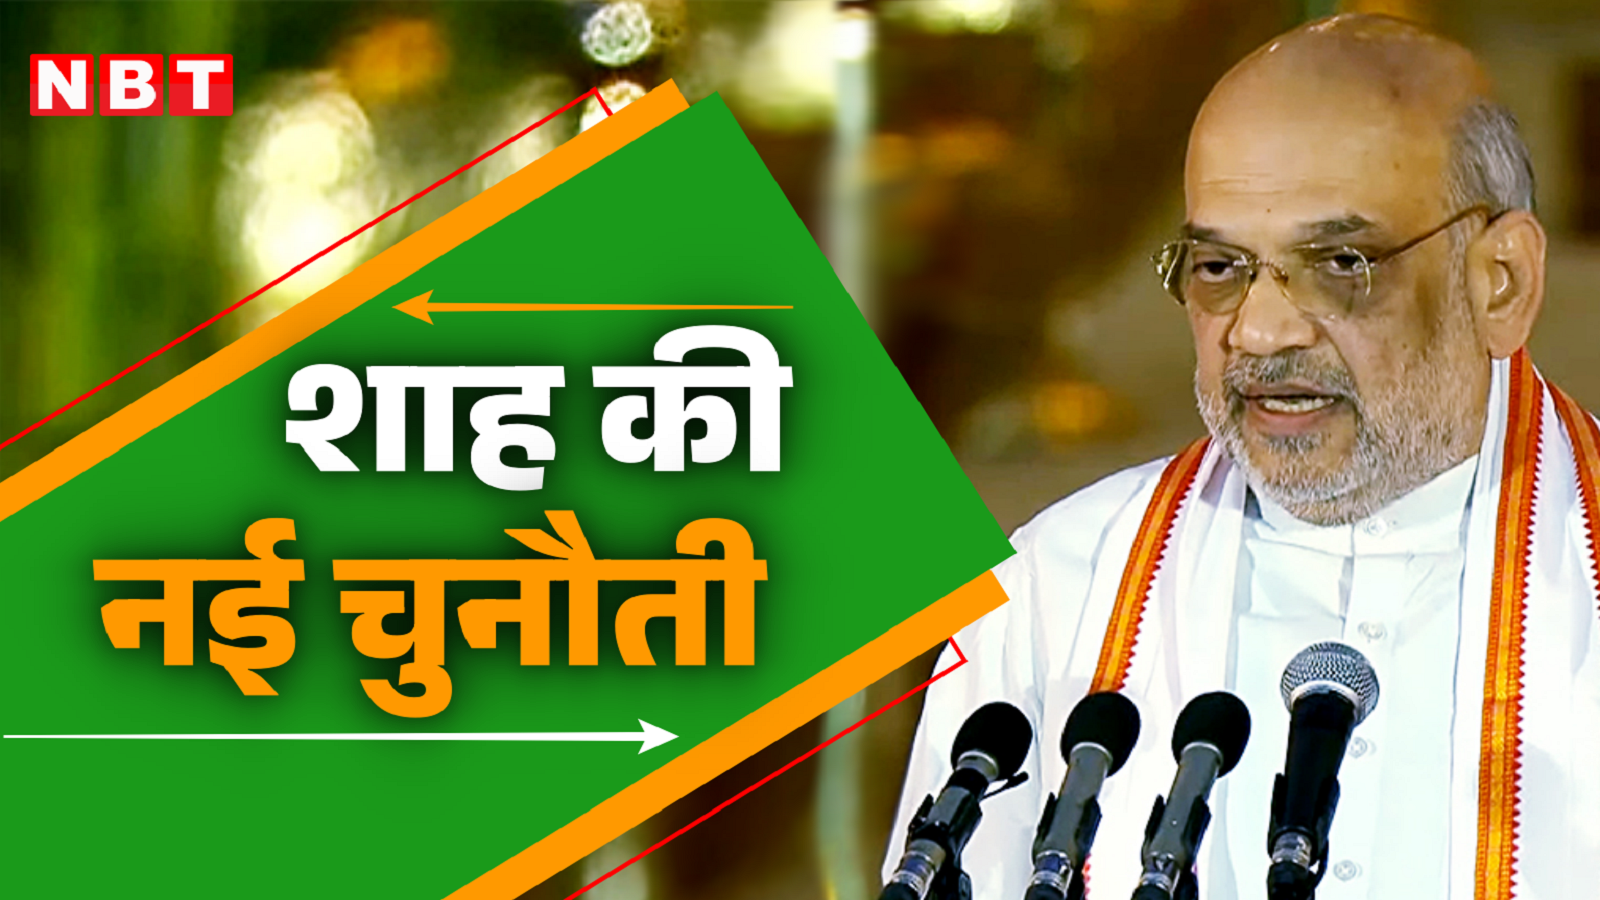 From elections in Jammu and Kashmir to peace in Manipur… know how big a challenge Amit Shah faces in his new term